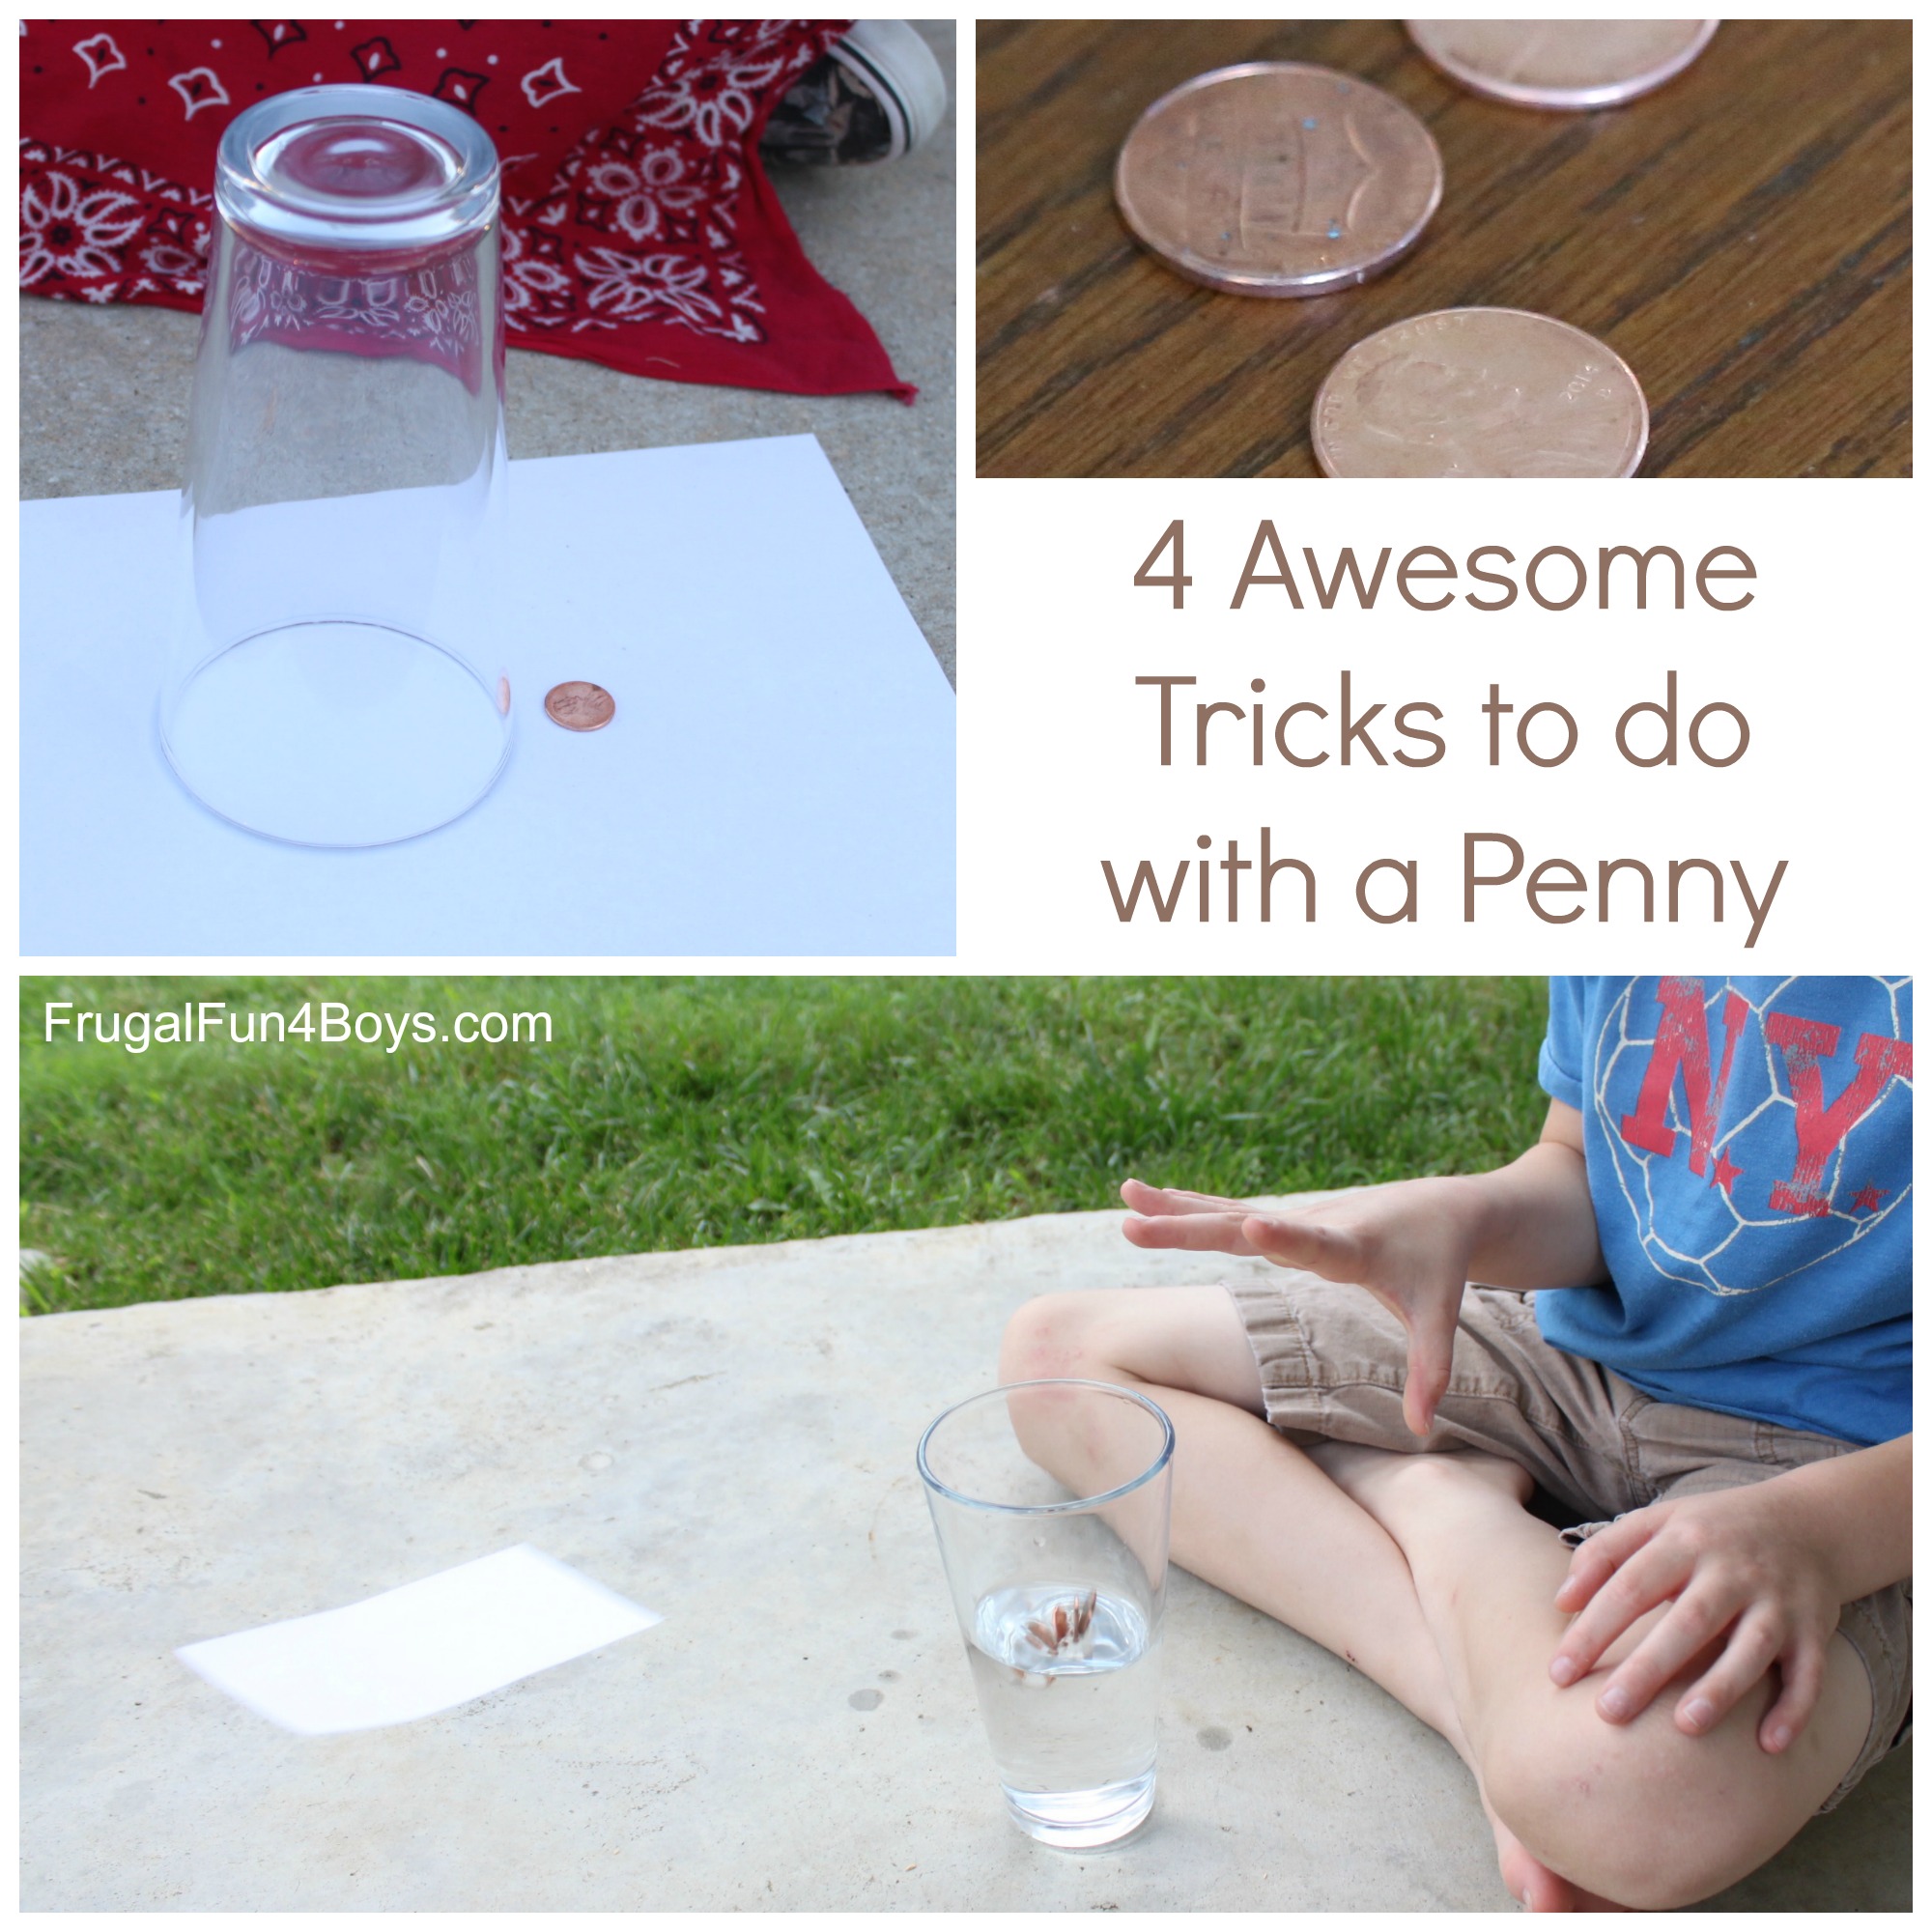 4 Awesome Tricks to do with a Penny